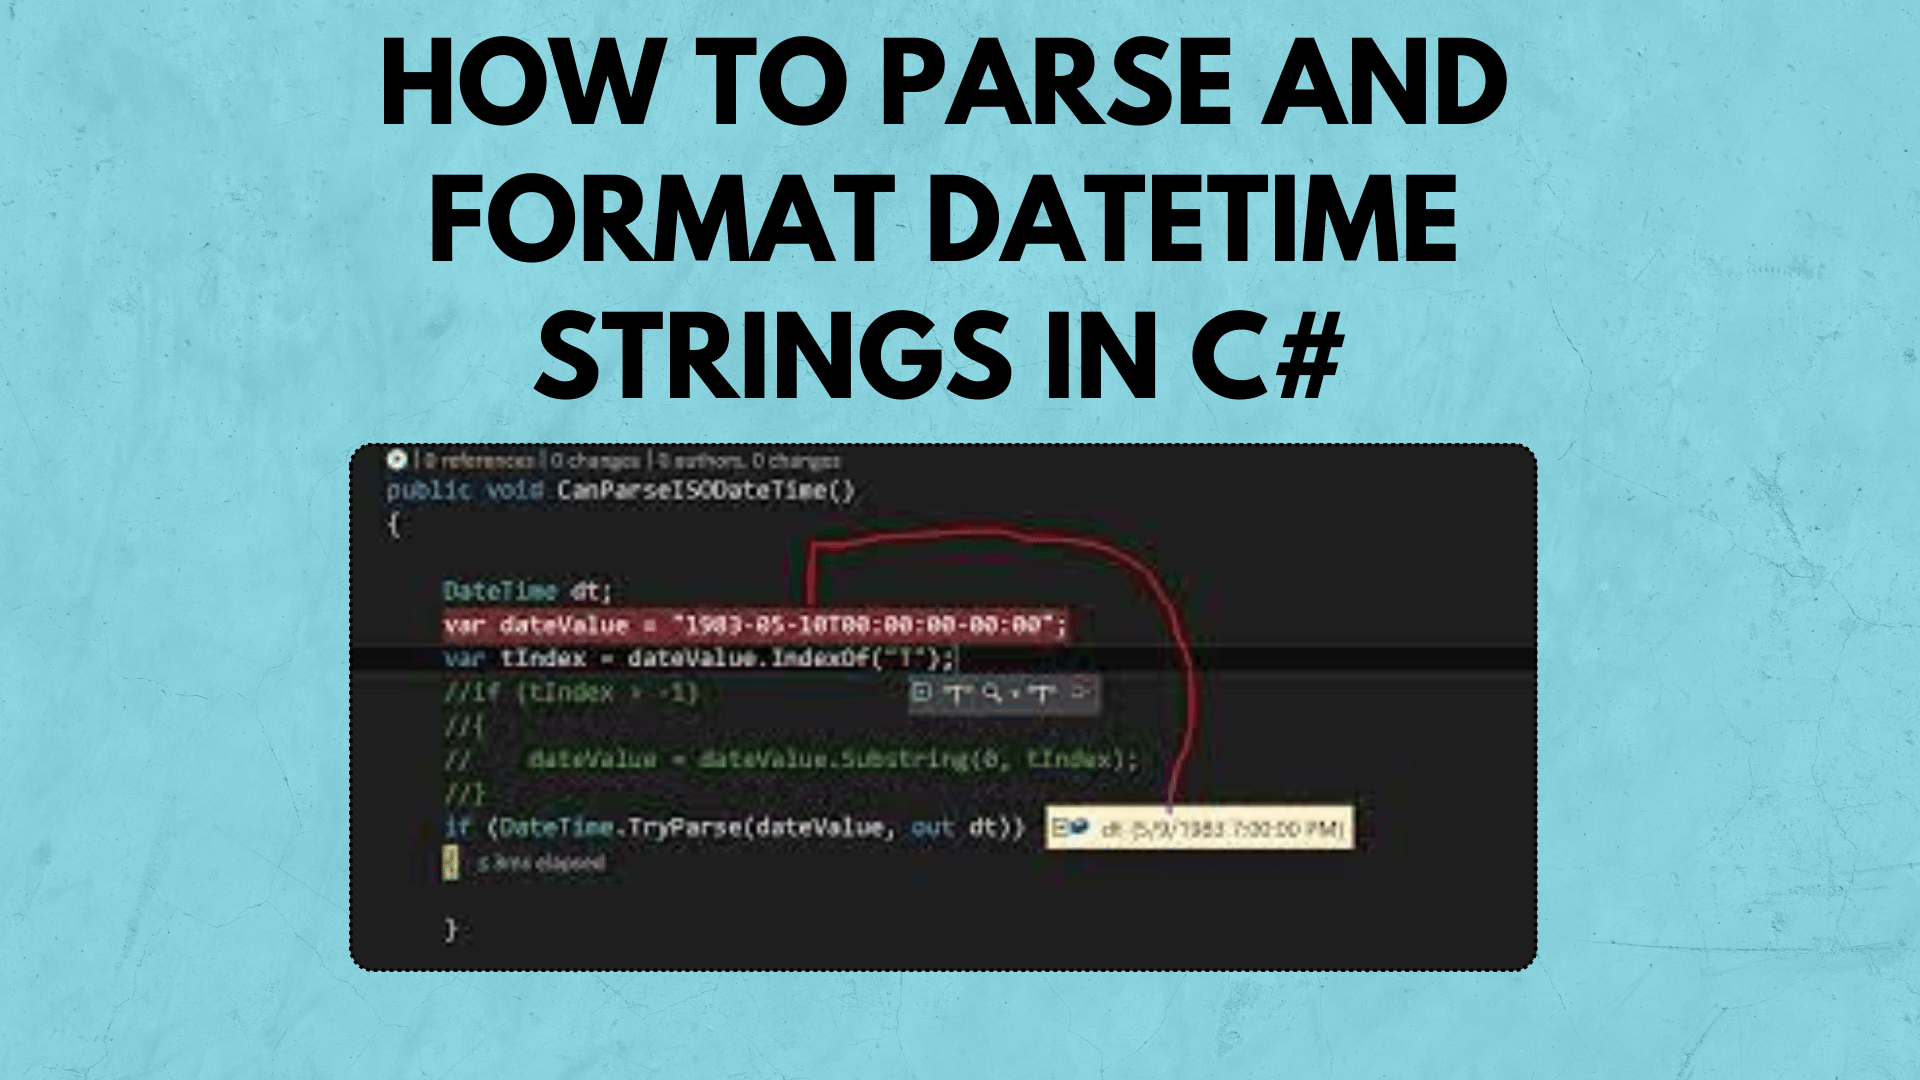 How to Parse and Format DateTime Strings in C#